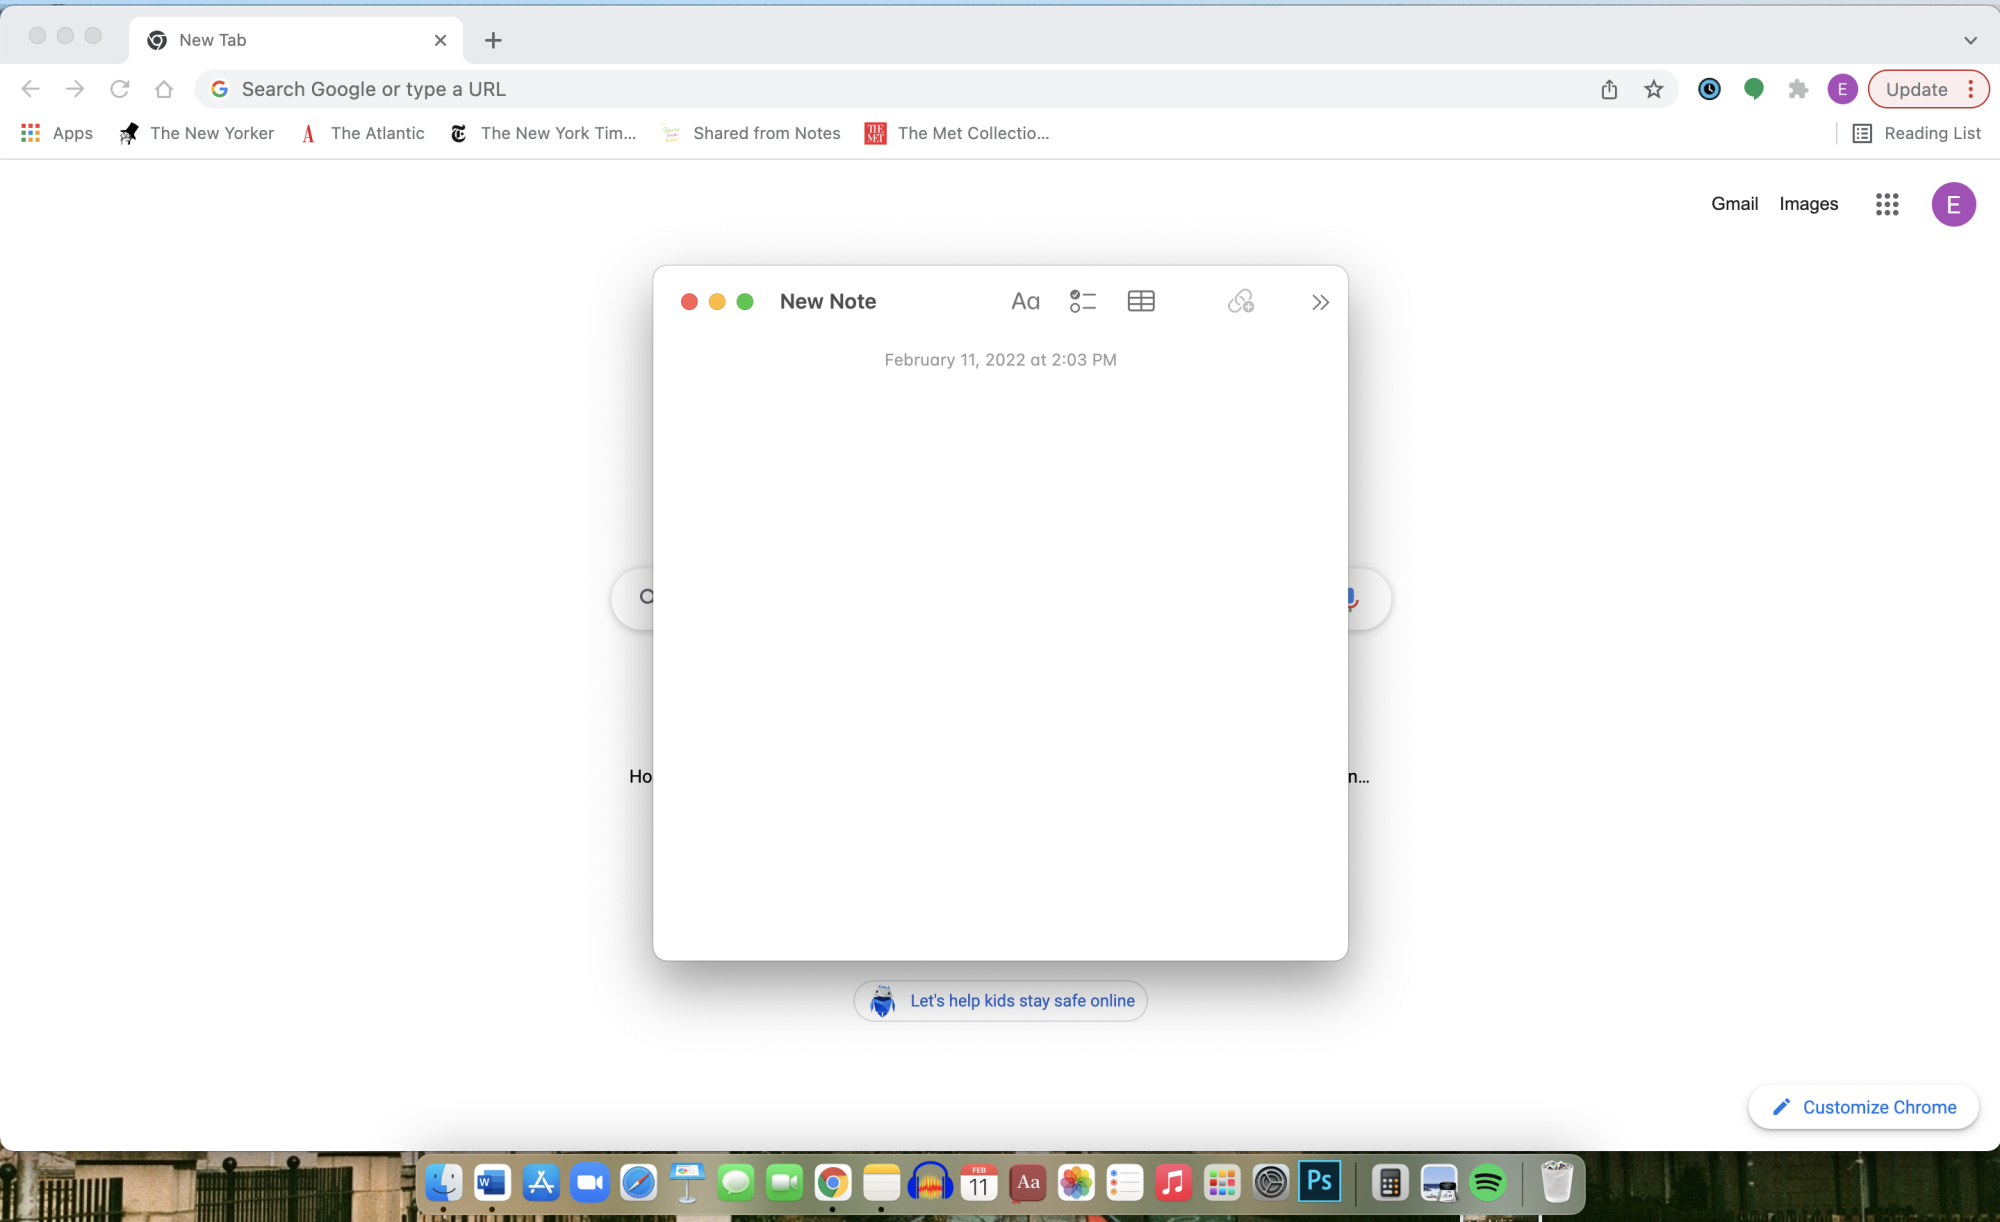 What a Quick Note looks like on macos. small white box in the center of a computer screen. 